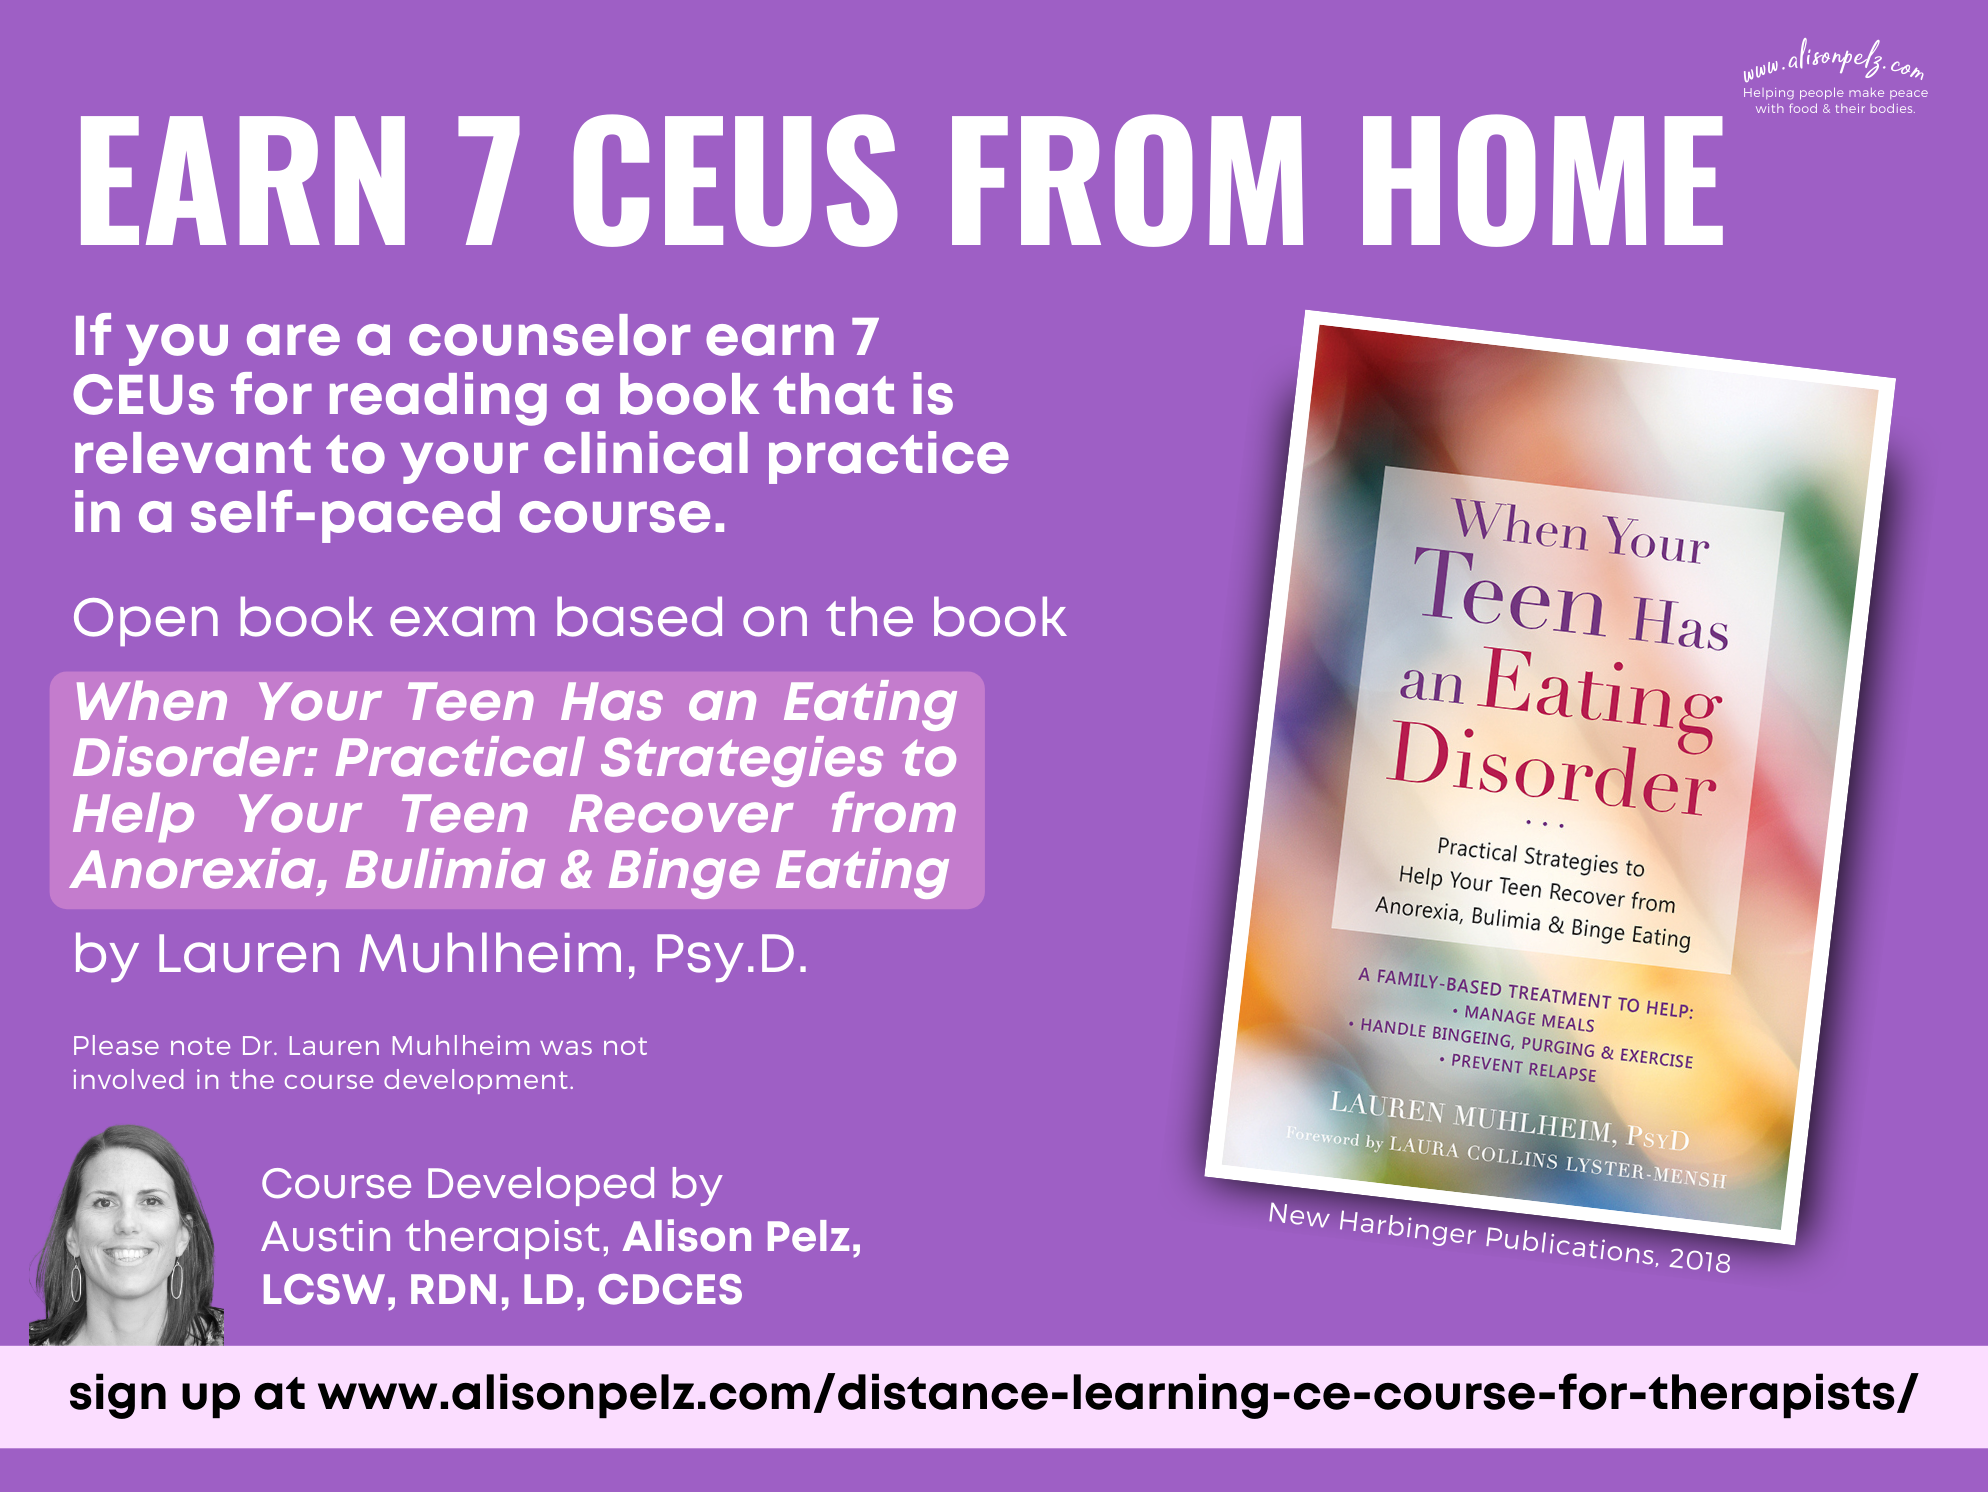 Earn 7 CEUs from Home If you are a counselor earn 7 CEUs for reading a book that is relevant to your clinical practice in a self-paced course. Open book exam based on the book When Your Teen Has an Eating Disorder: Practical Strategies to Help Your Teen Recover from Anorexia, Bulimia & Binge Eating by Lauren Muhlheim, Psy.D. Please note Dr. Lauren Muhlheim was not involved in the course development. Course Developed by Austin therapist, Alison Pelz, LCSW, RDN, LD, CDCES sign up at www.alisonpelz.com/distance-learning-ce-course-for-therapists/